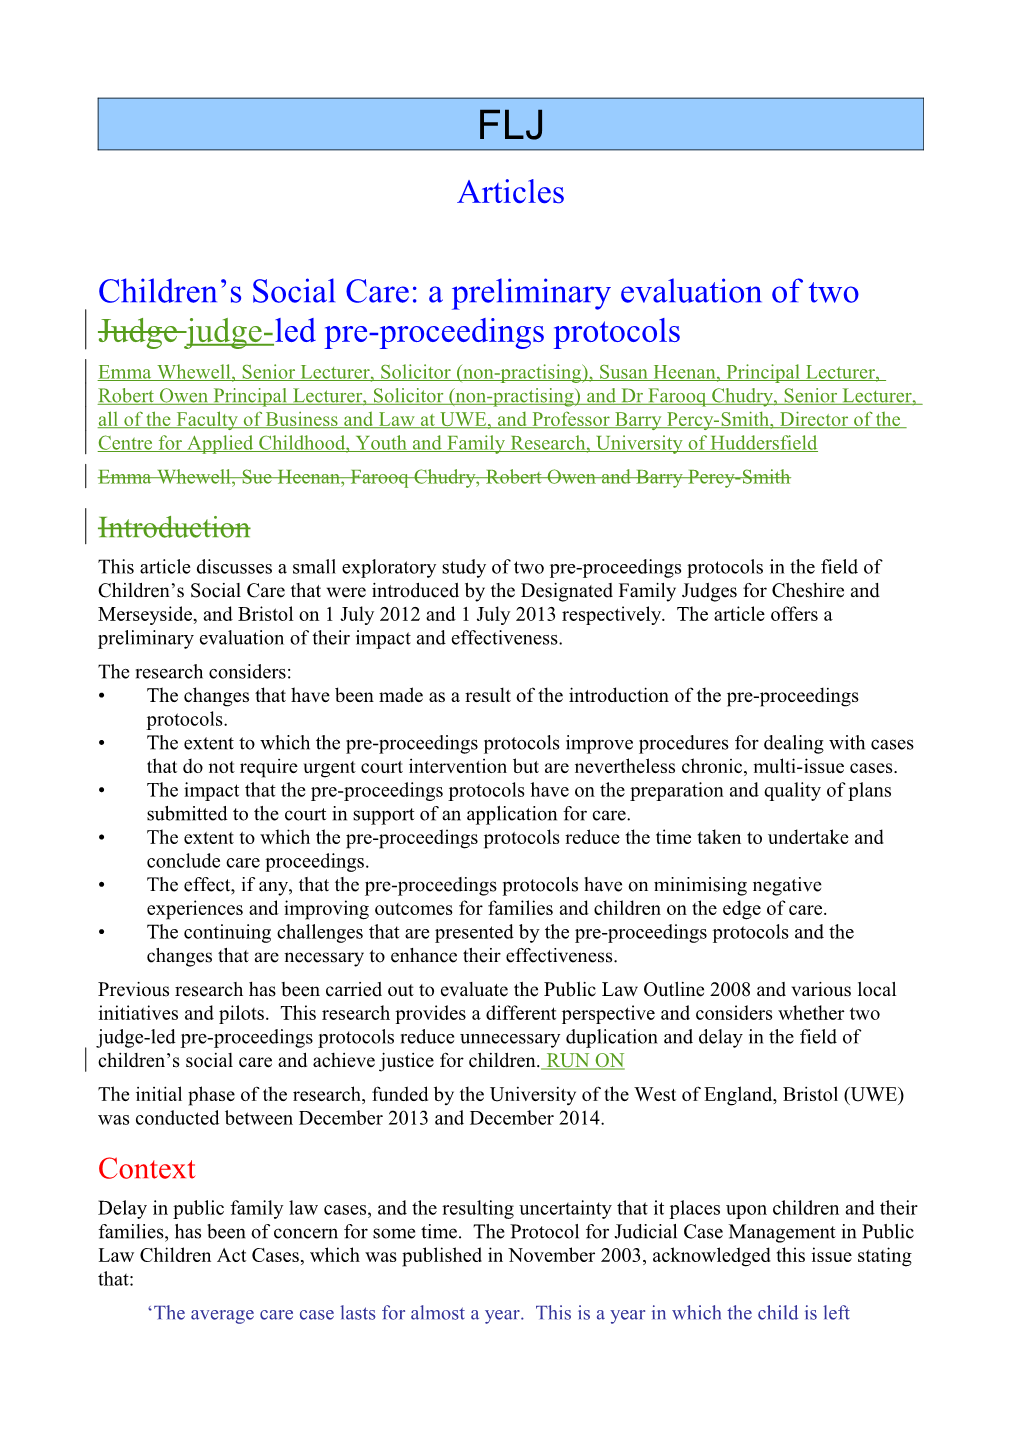 Children S Social Care: a Preliminary Evaluation of Two Judge Judge-Led Pre-Proceedings